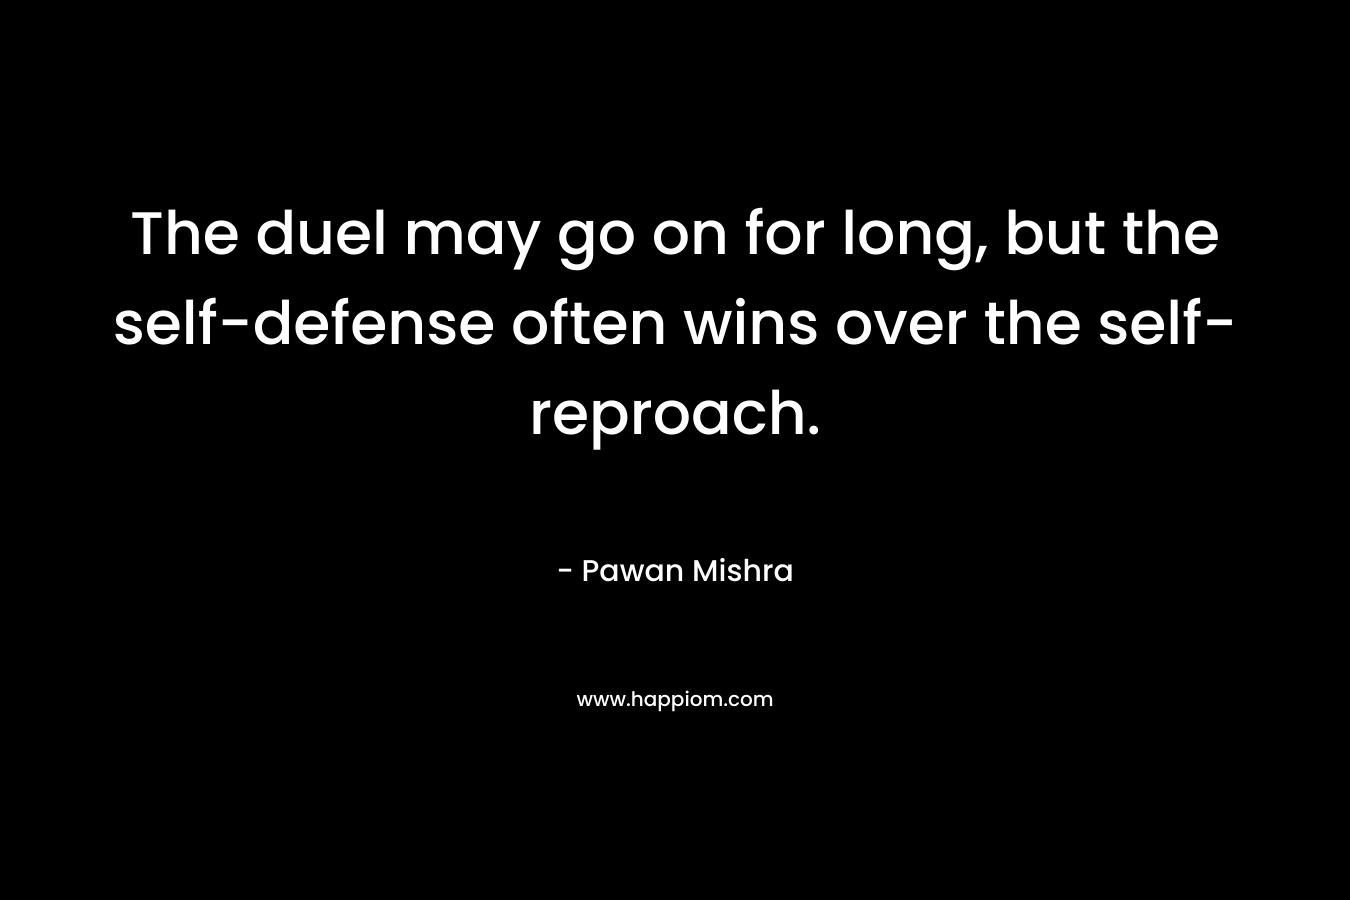 The duel may go on for long, but the self-defense often wins over the self-reproach. – Pawan Mishra